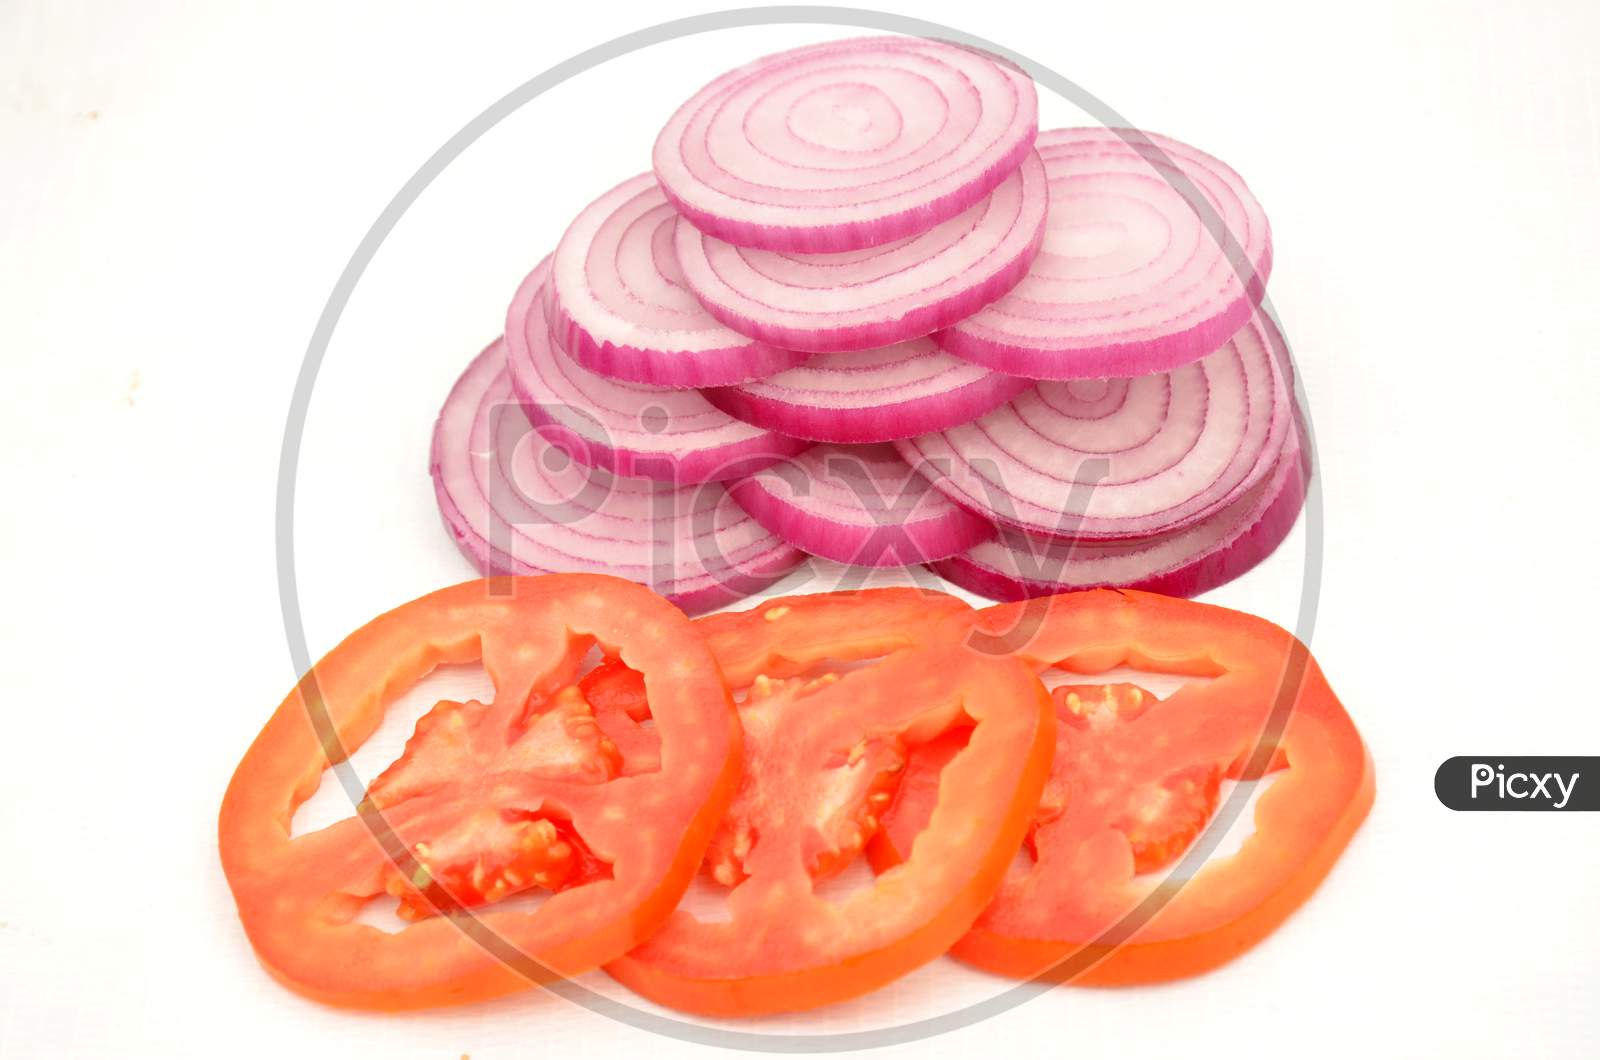 red tometo with onion slice isolated on white background